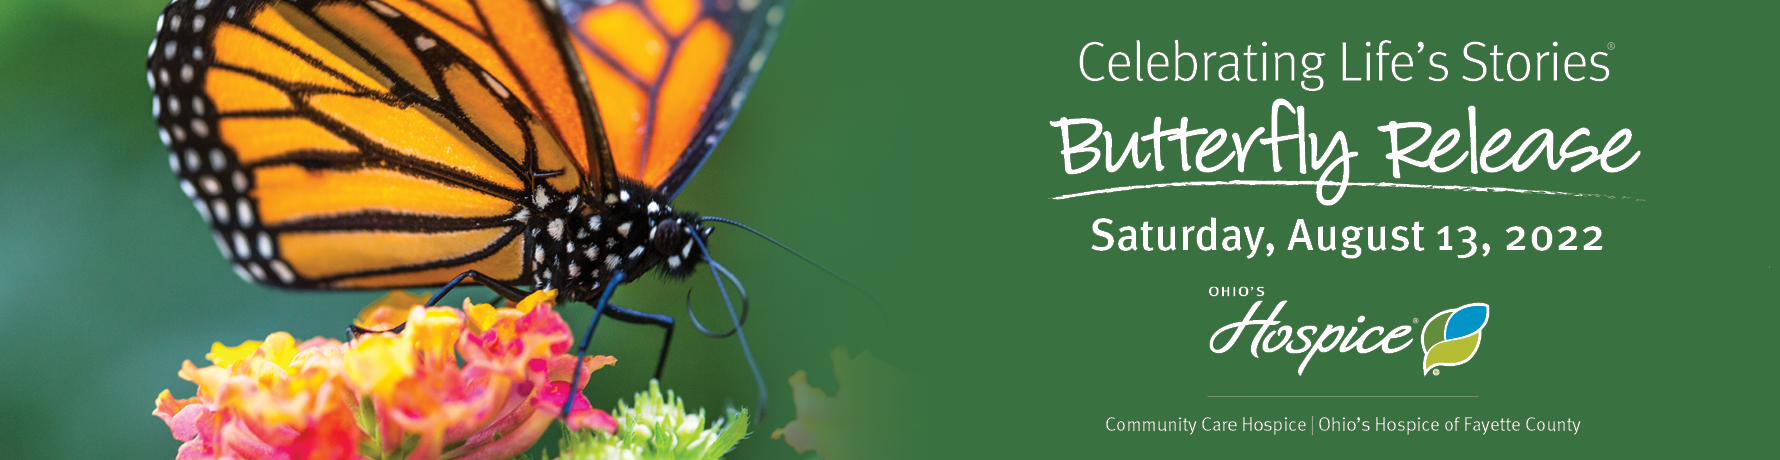 Celebrating Life's Stories Butterfly Release | Saturday, August 13, 2022